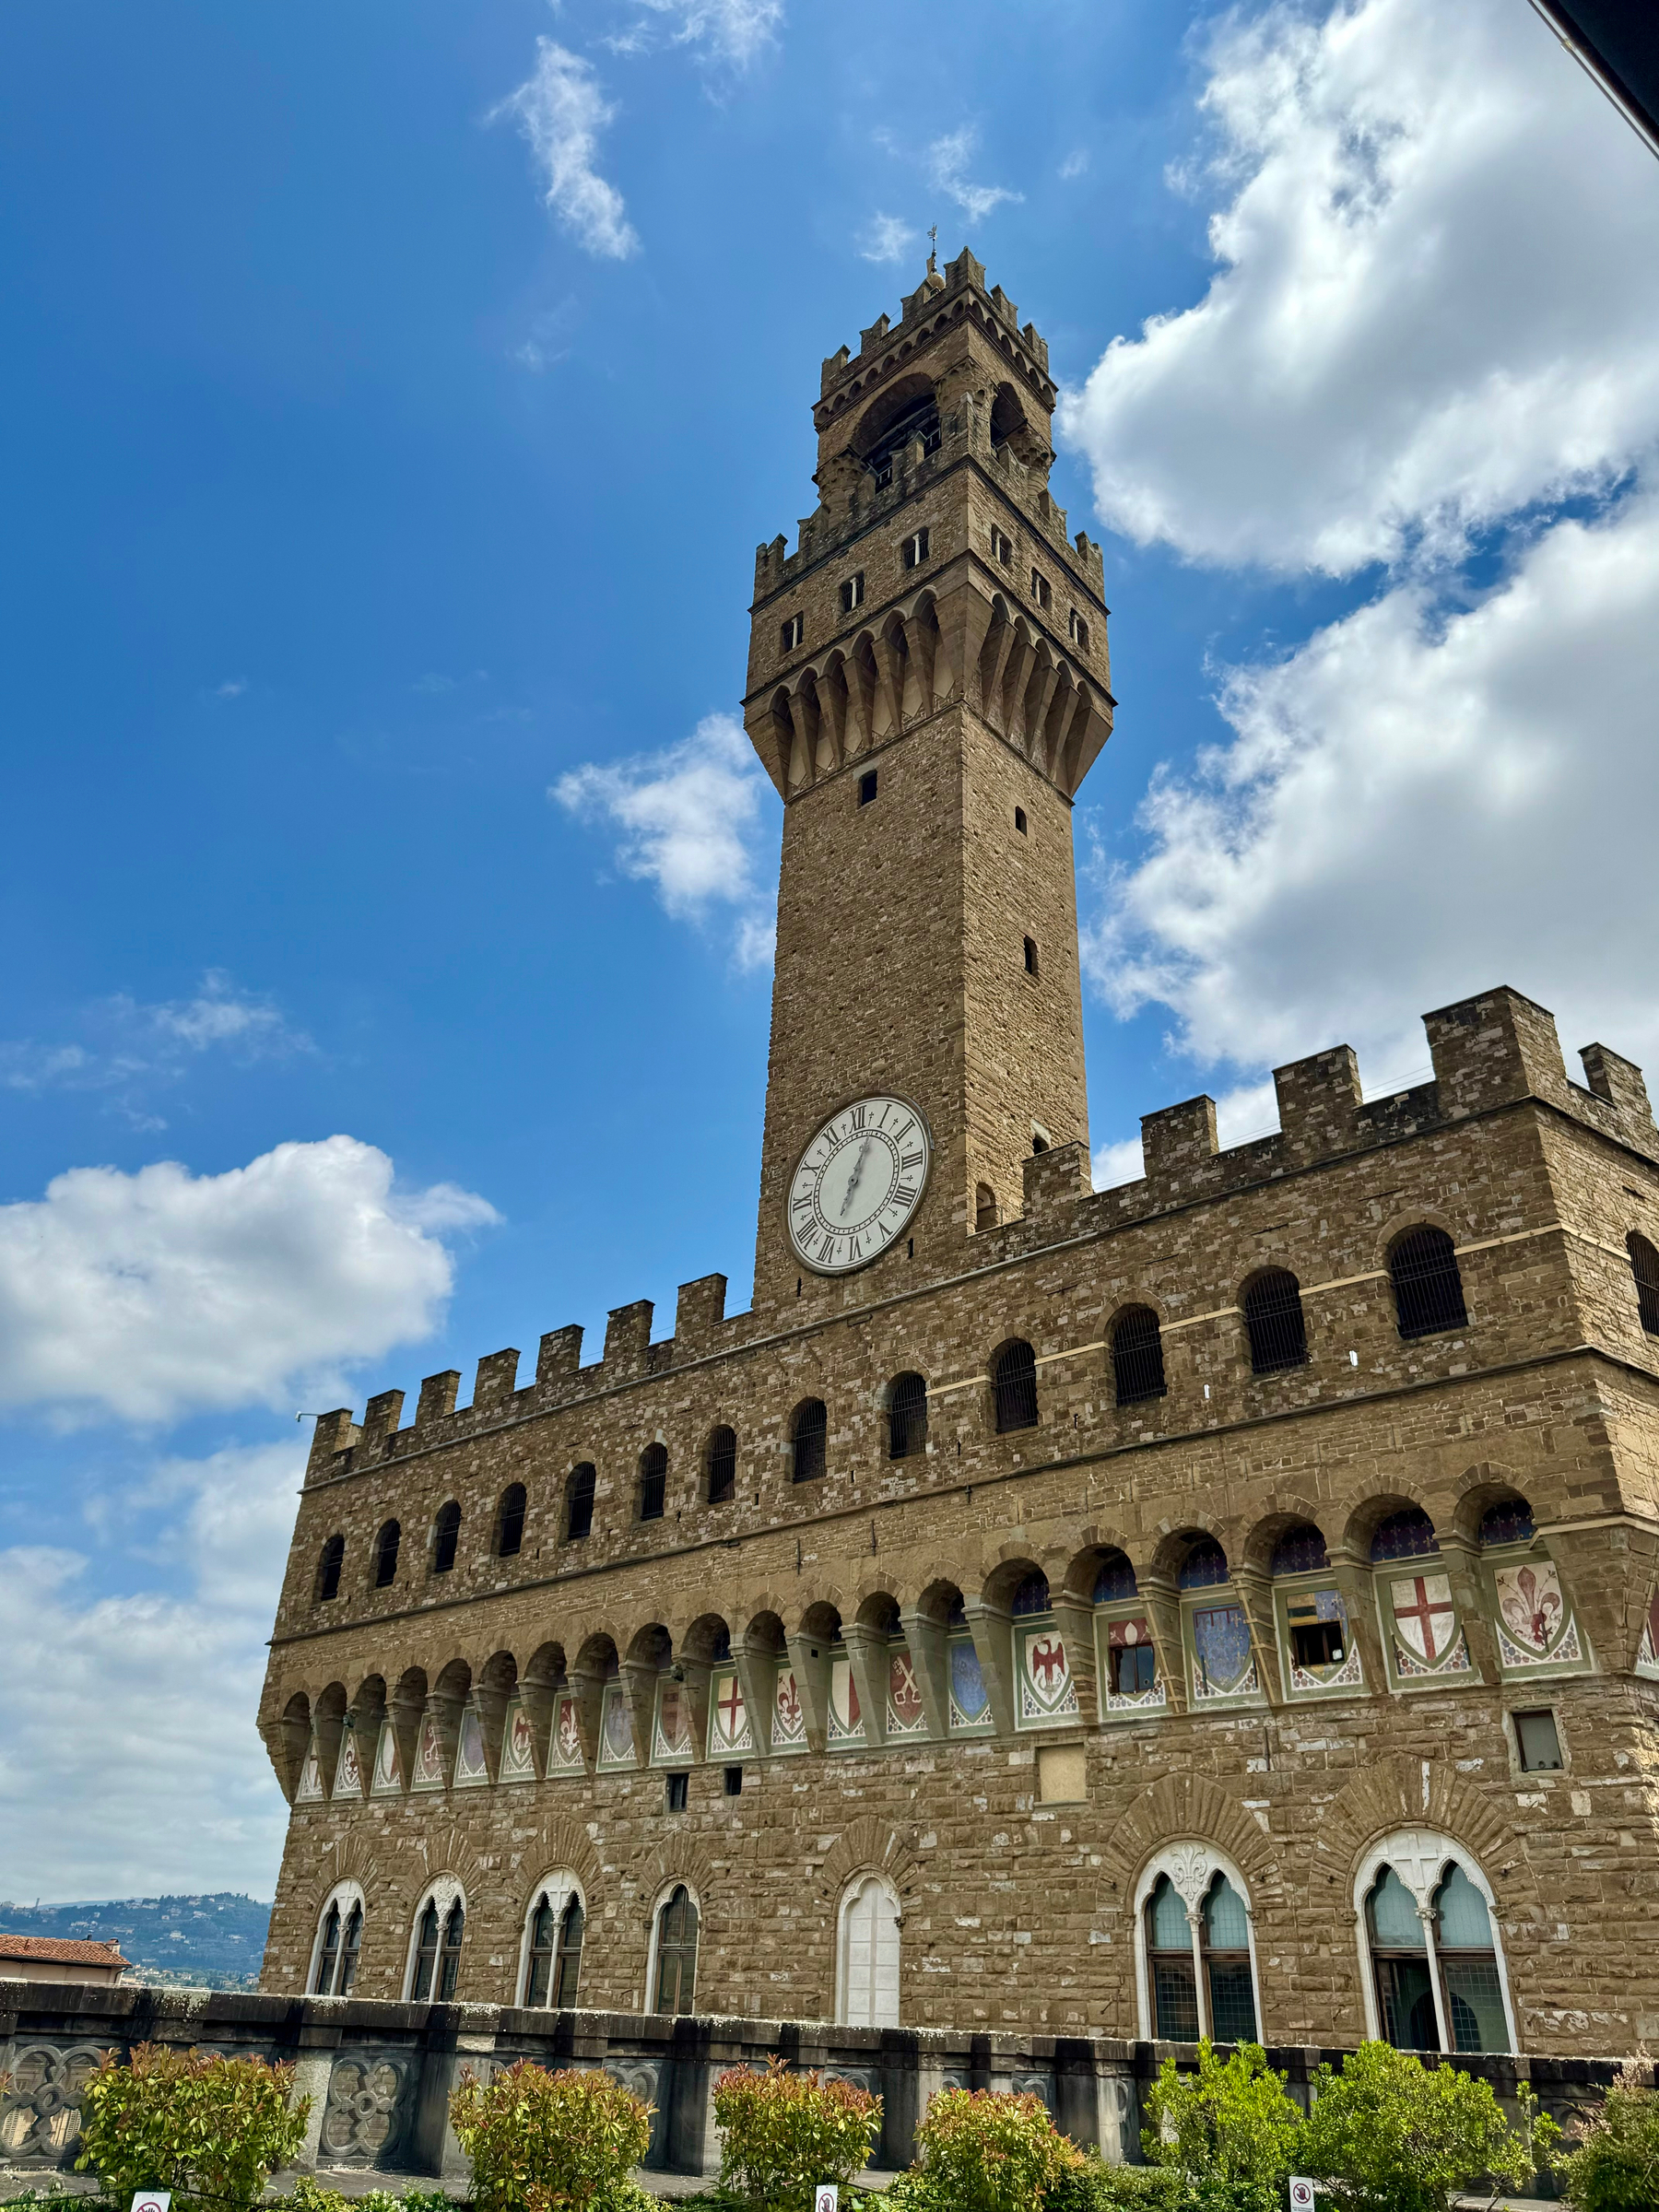 The image depicts the Palazzo Vecchio, a historic palace located in Florence, Italy. The photo showcases the building’s tall stone brick tower with a clock and battlements, set against a backdrop of a blue sky with some clouds.